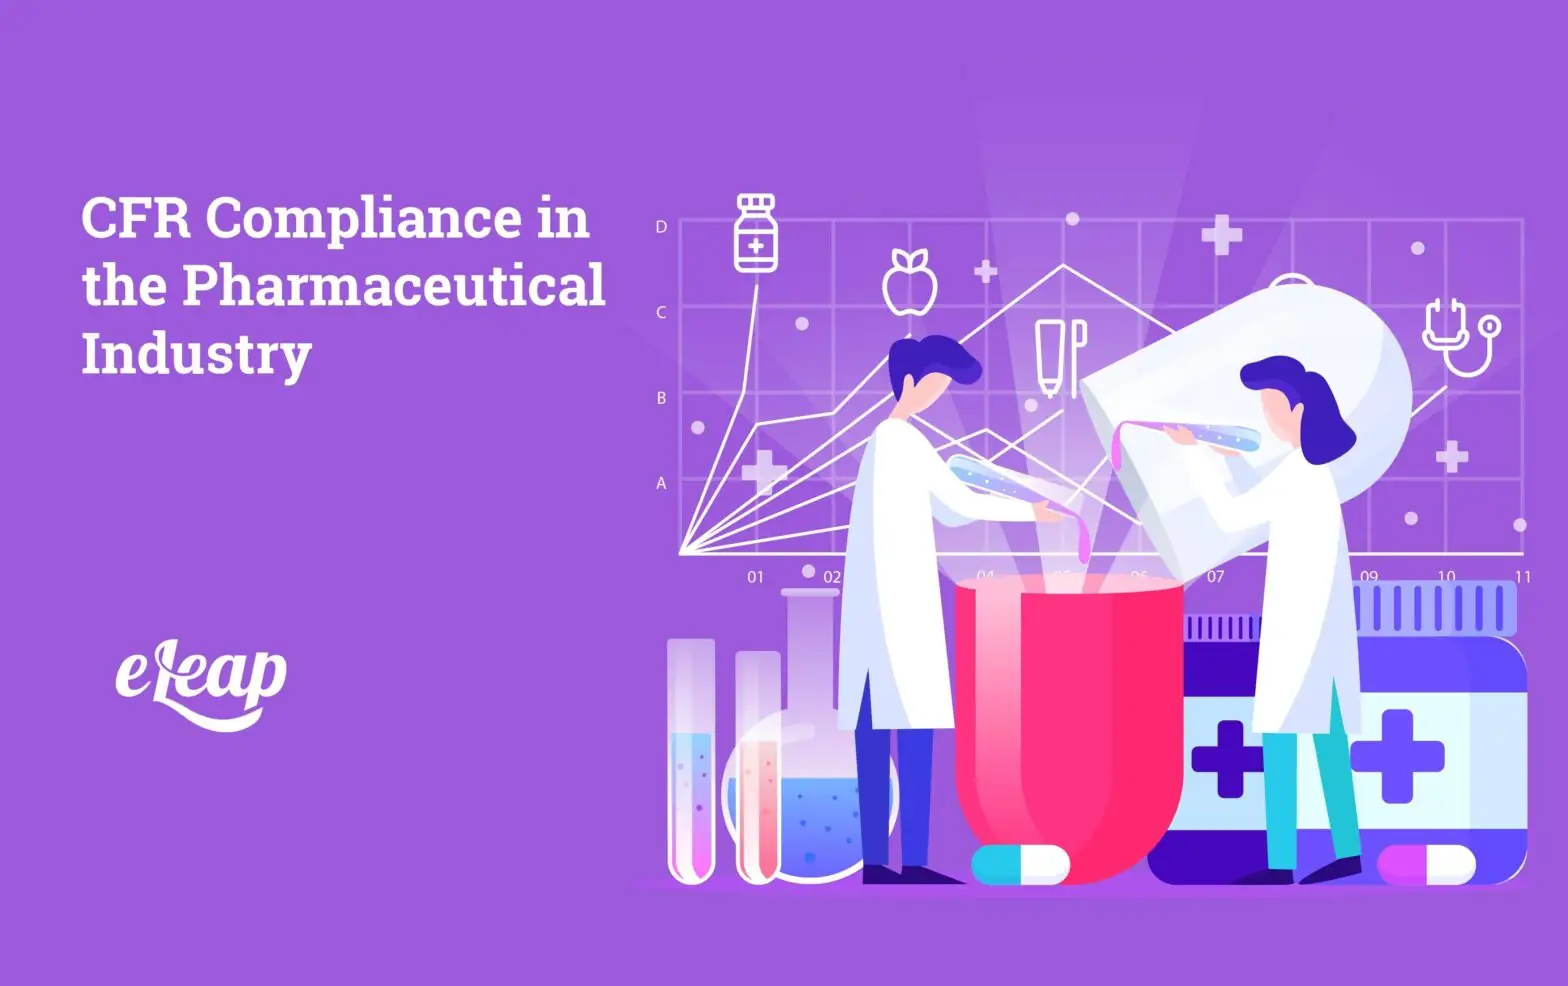 CFR Compliance in the Pharmaceutical Industry